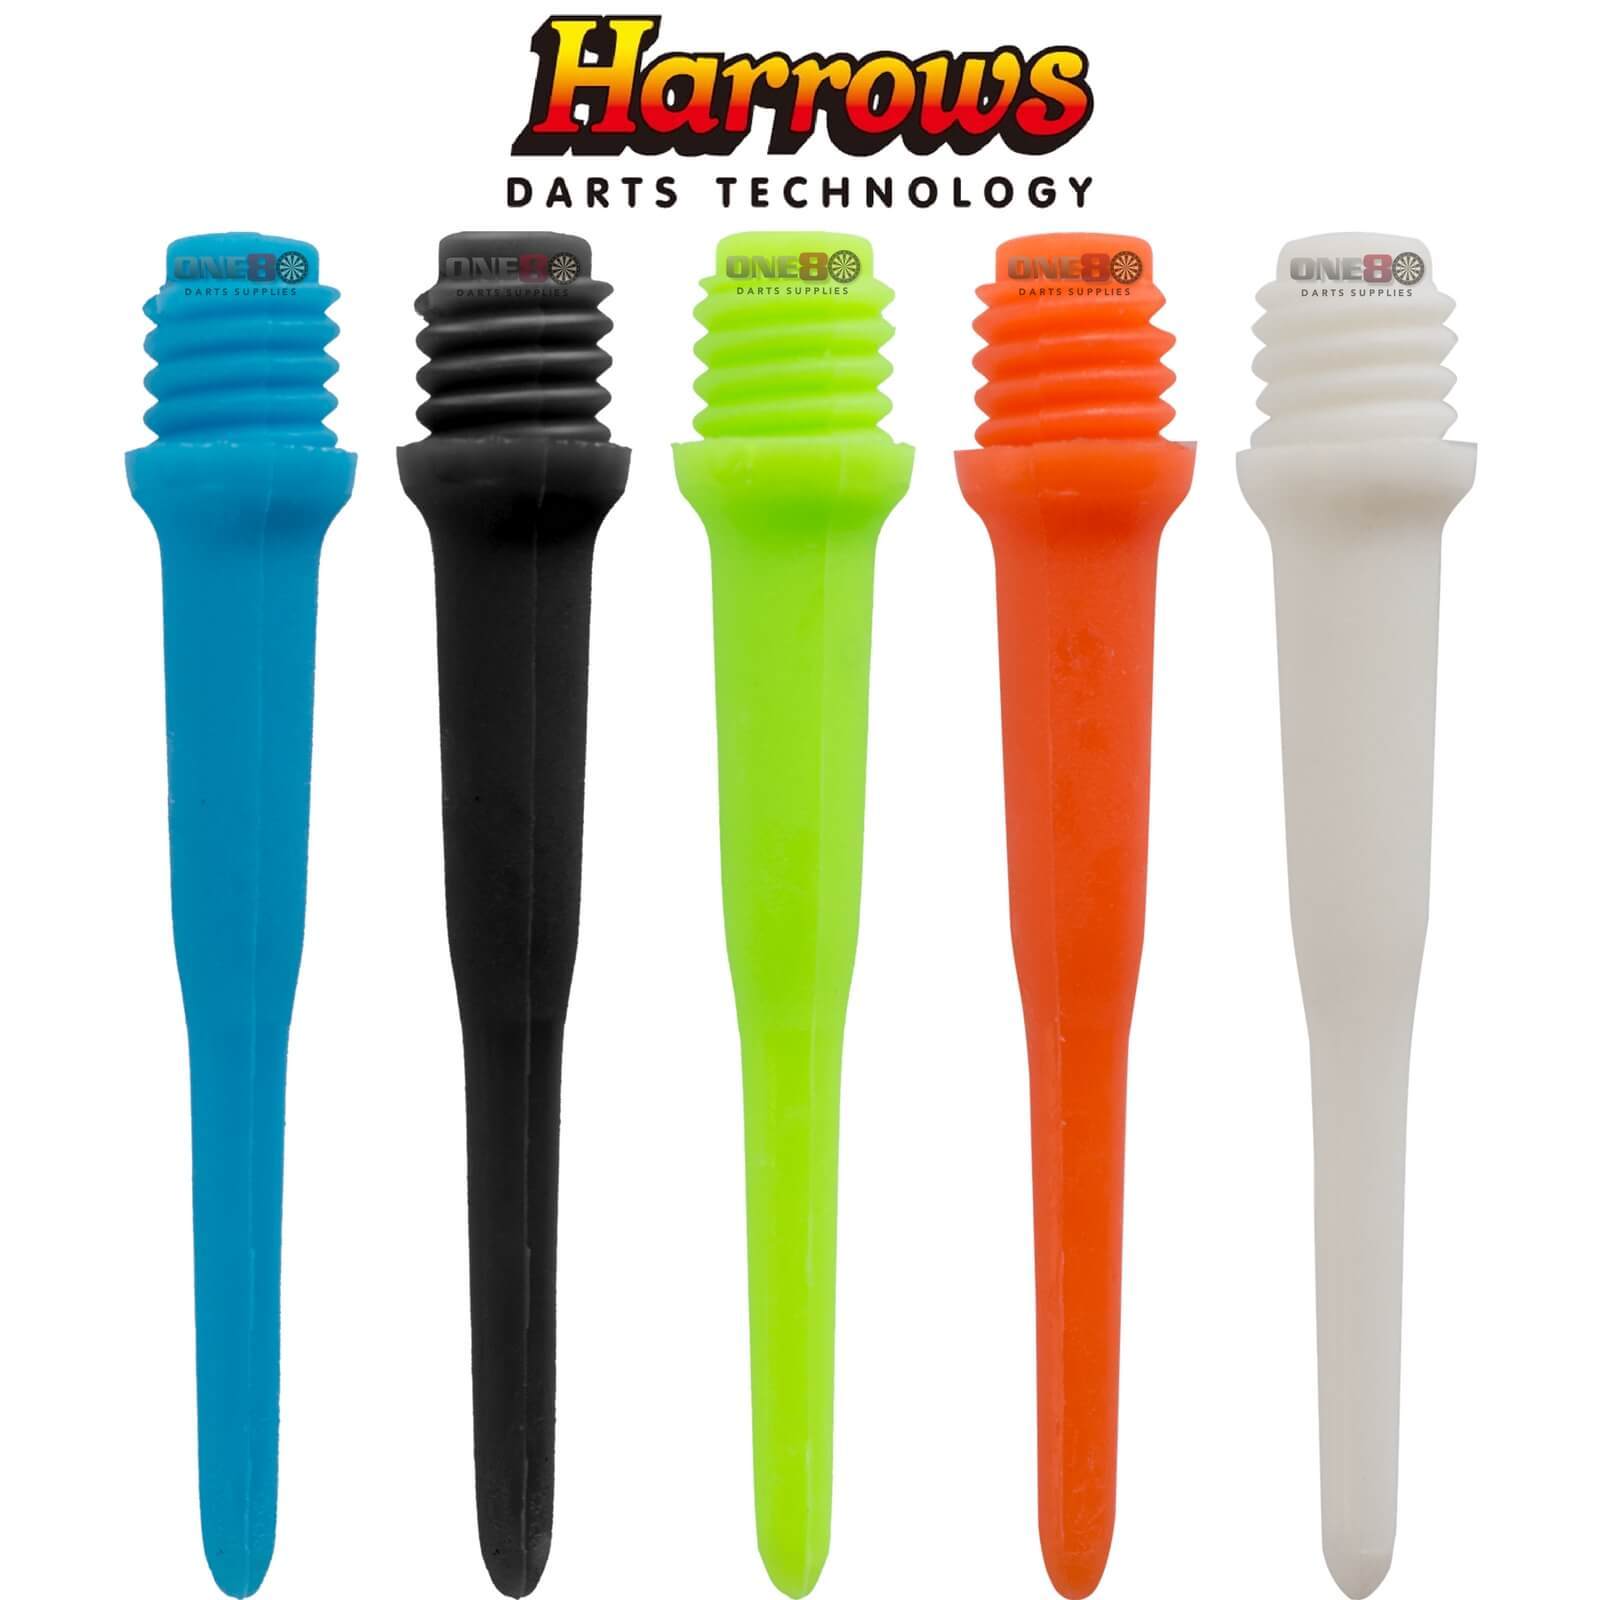 Soft Tip Accessories - Harrows - 25mm Pro Soft Tip Dart Points - Bag of 50 